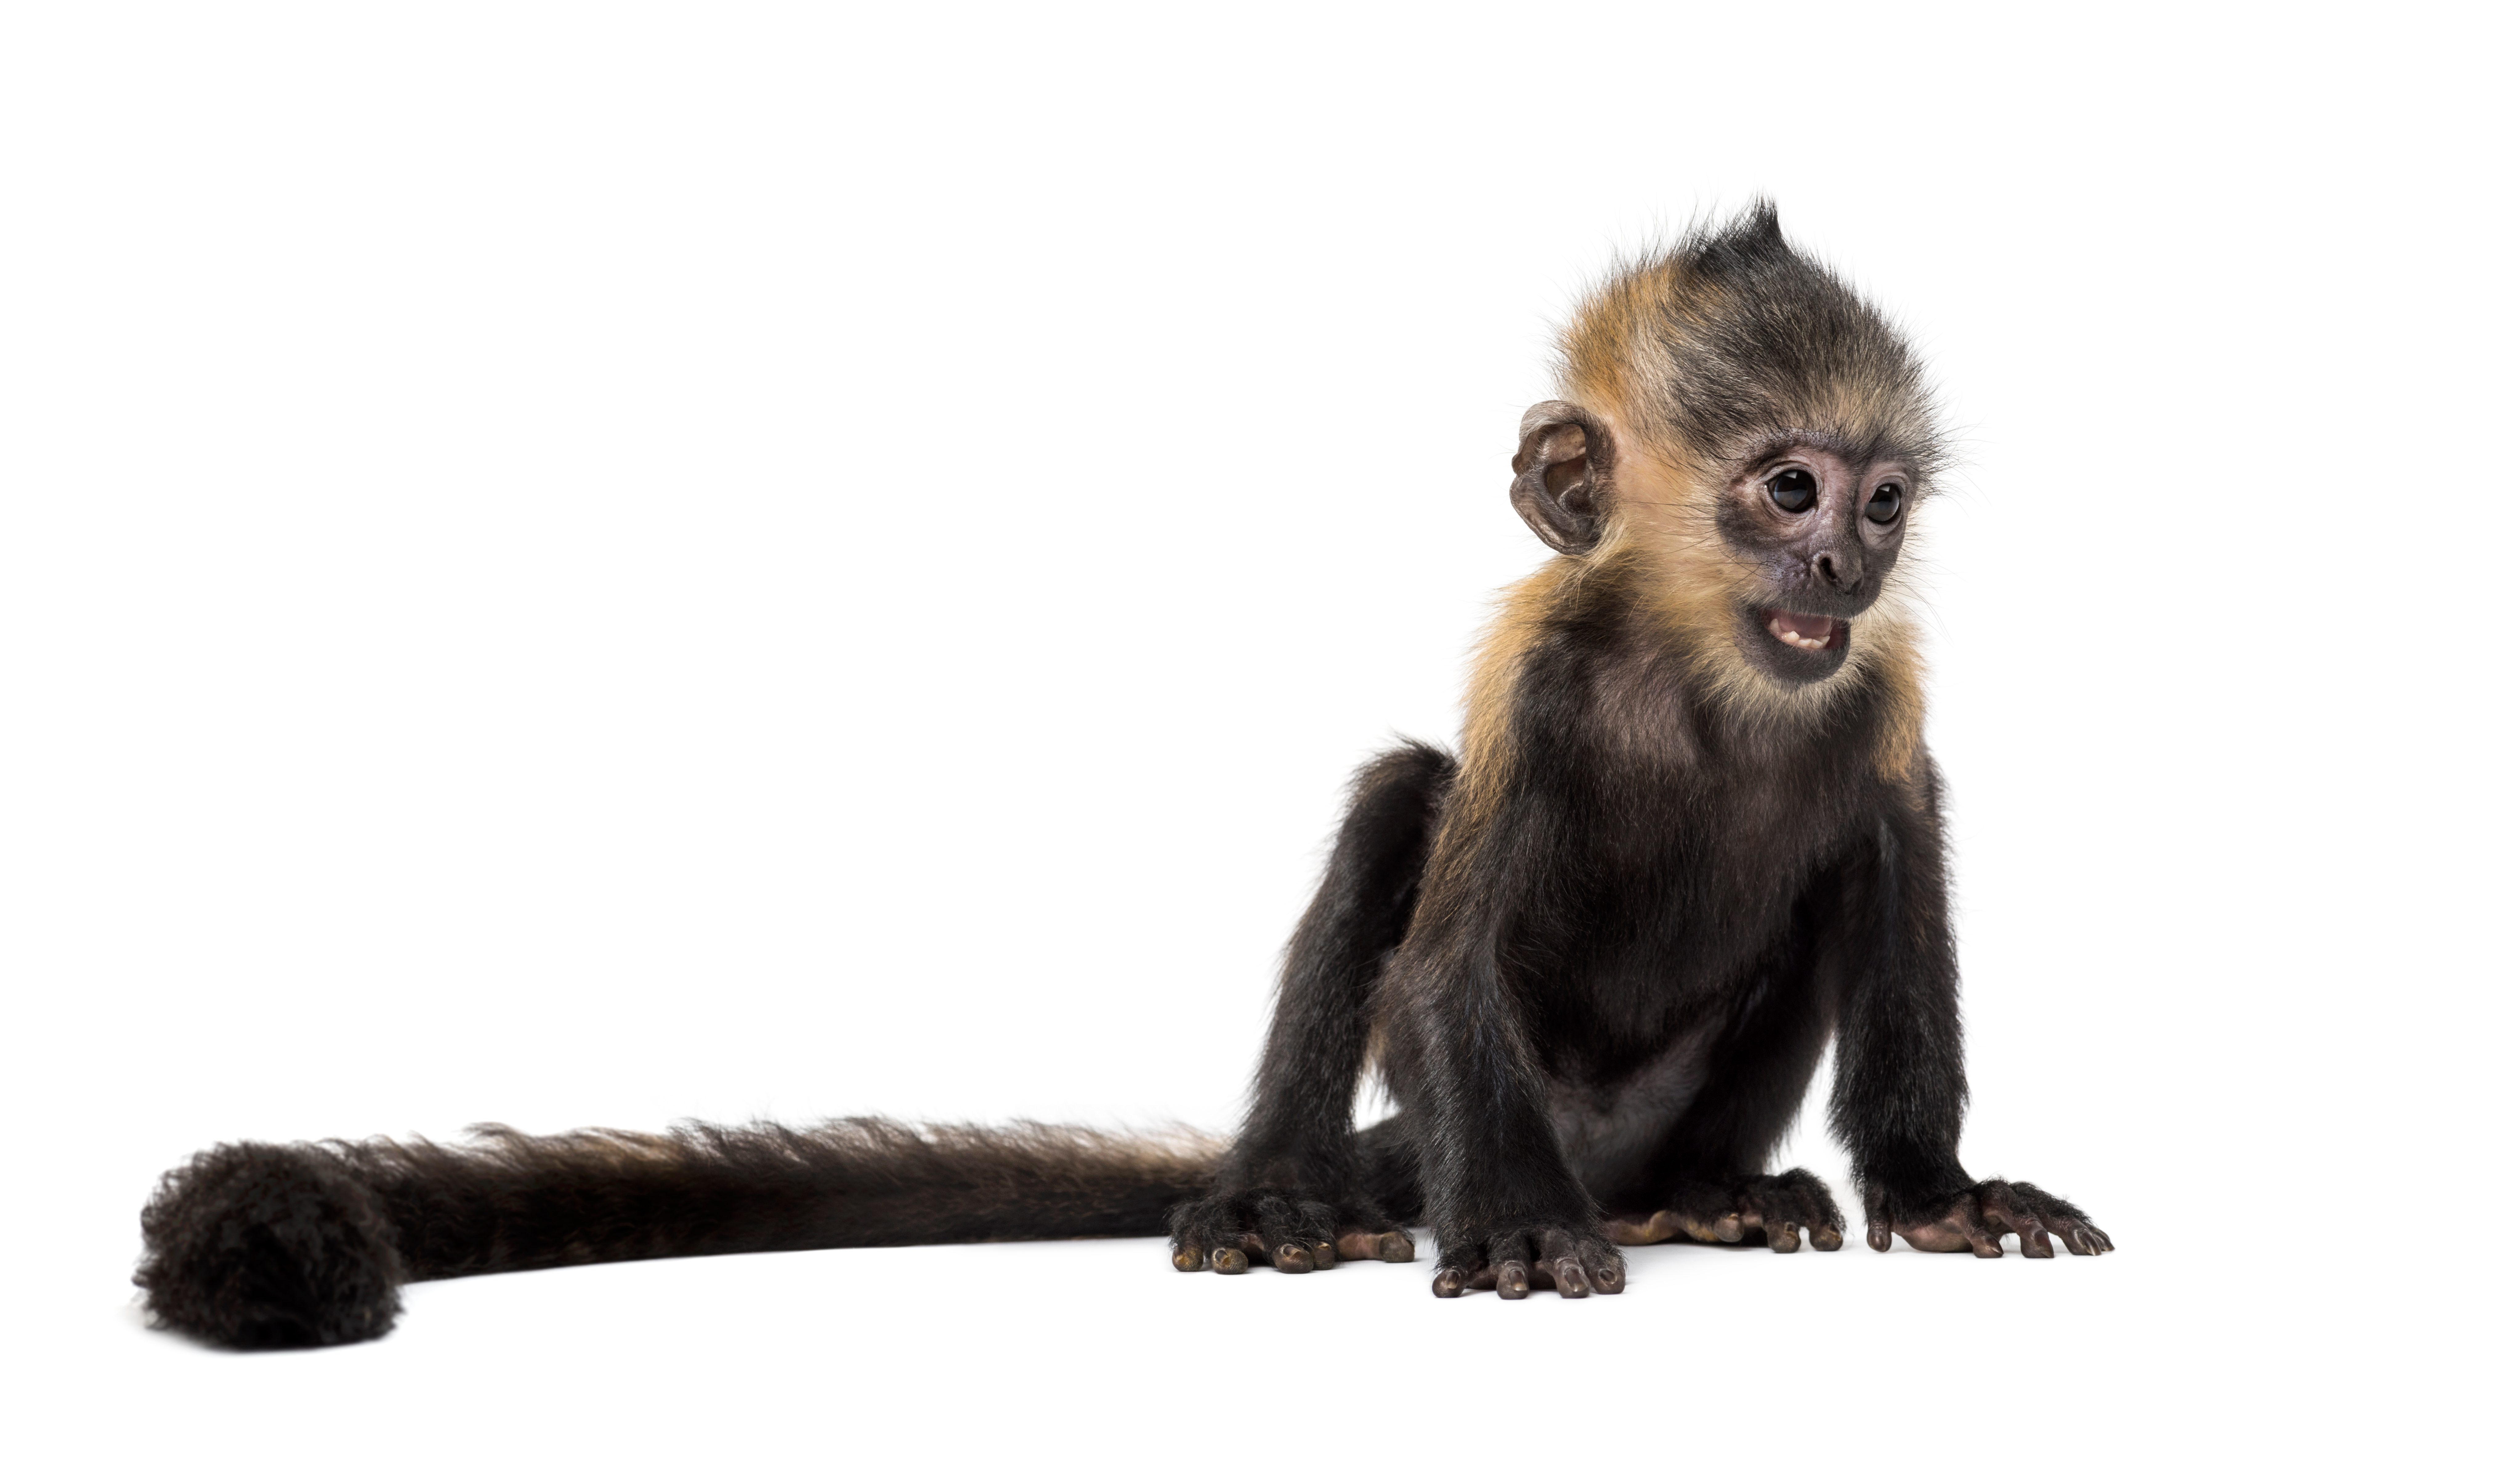 monkey with a long tail sitting with a white background.